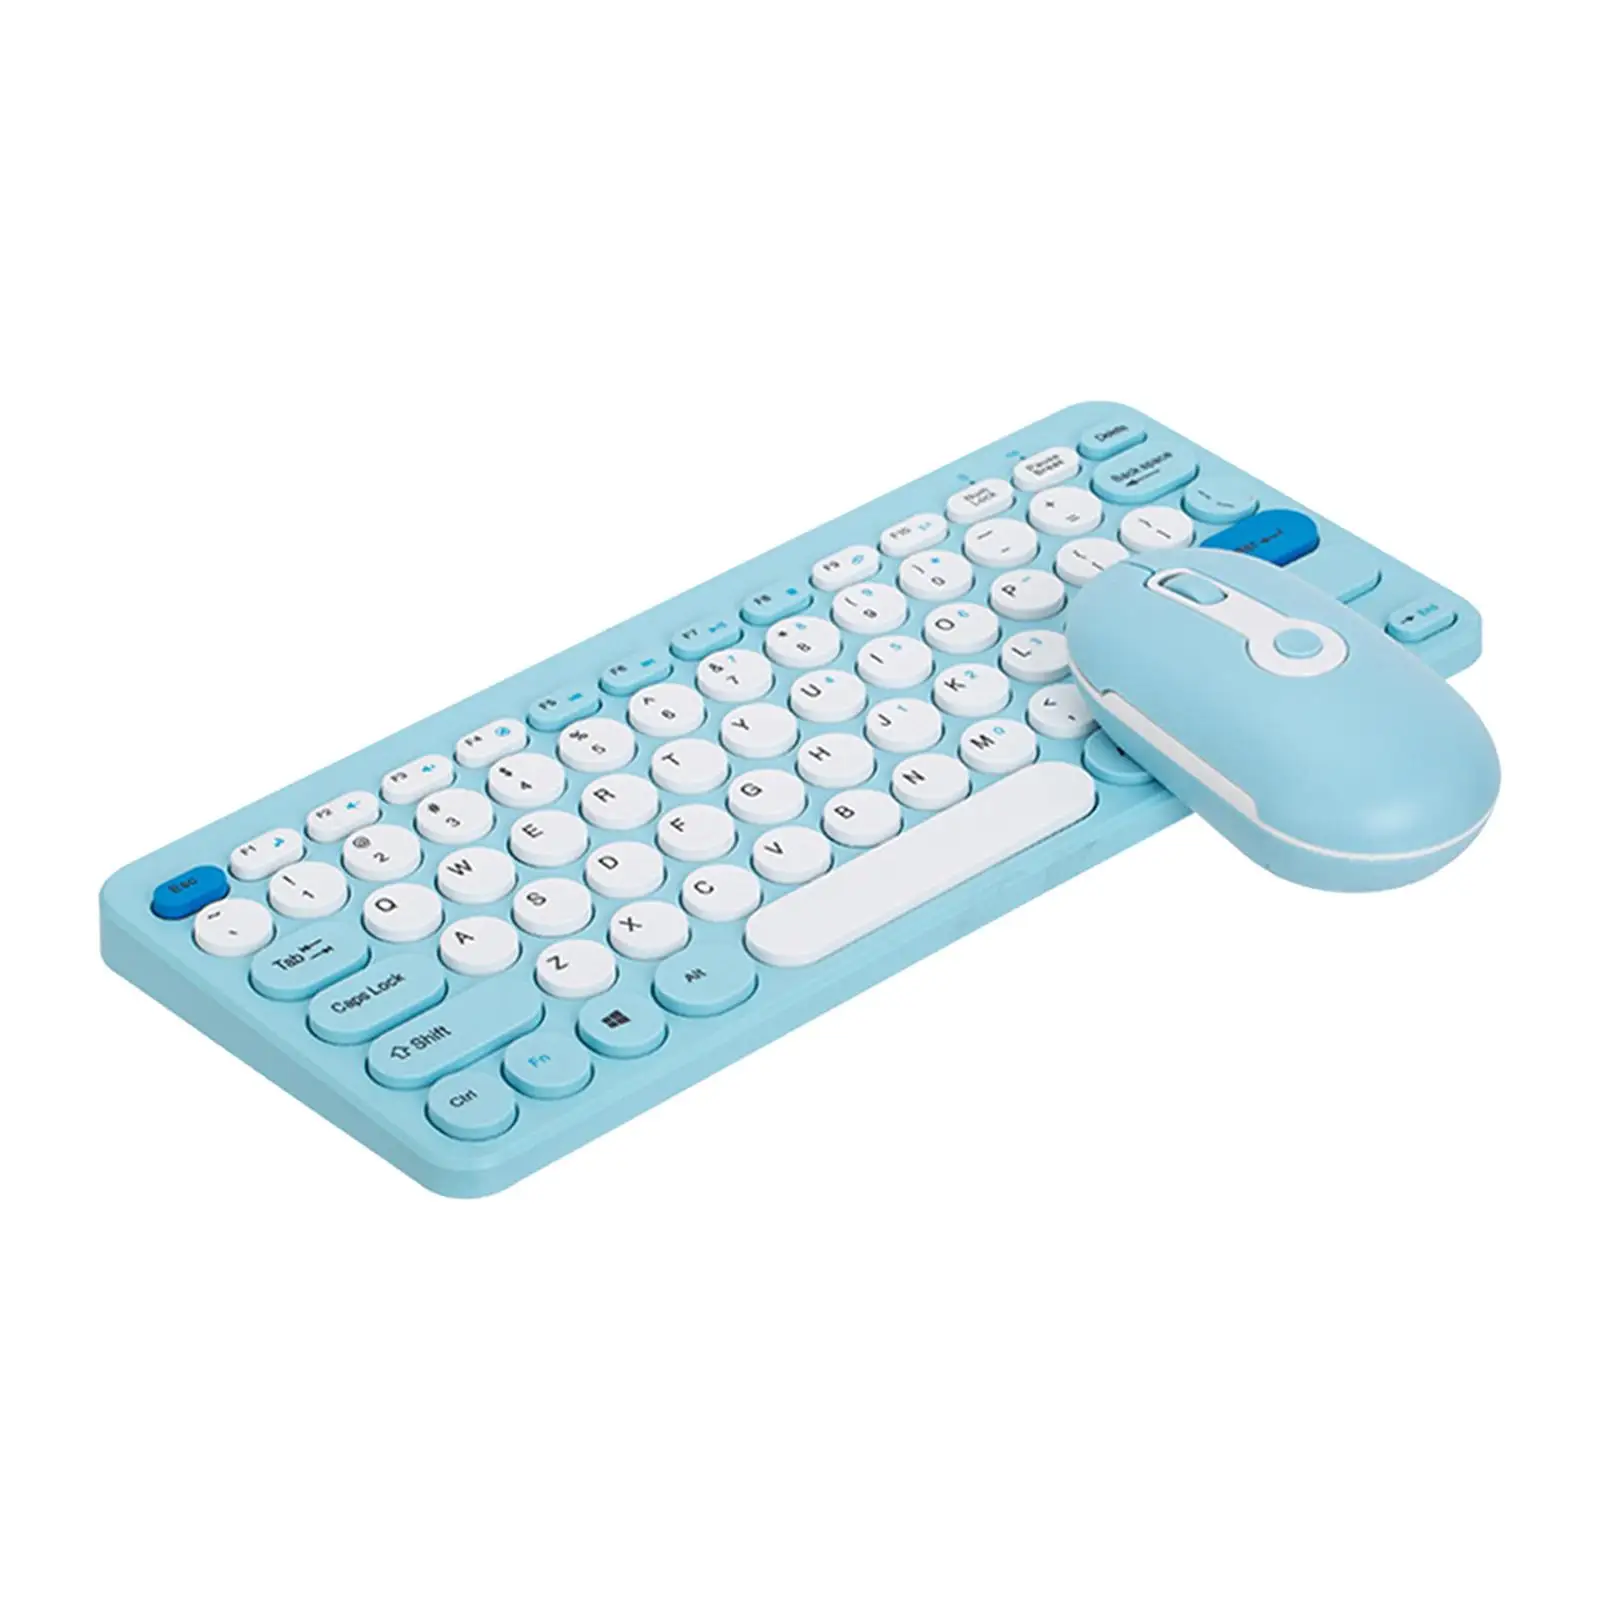 Wireless Computer Keyboard Mouse Cordless USB Keyboard and Mouse and Quiet Click for PC Computer Desktop Android Tv Laptop